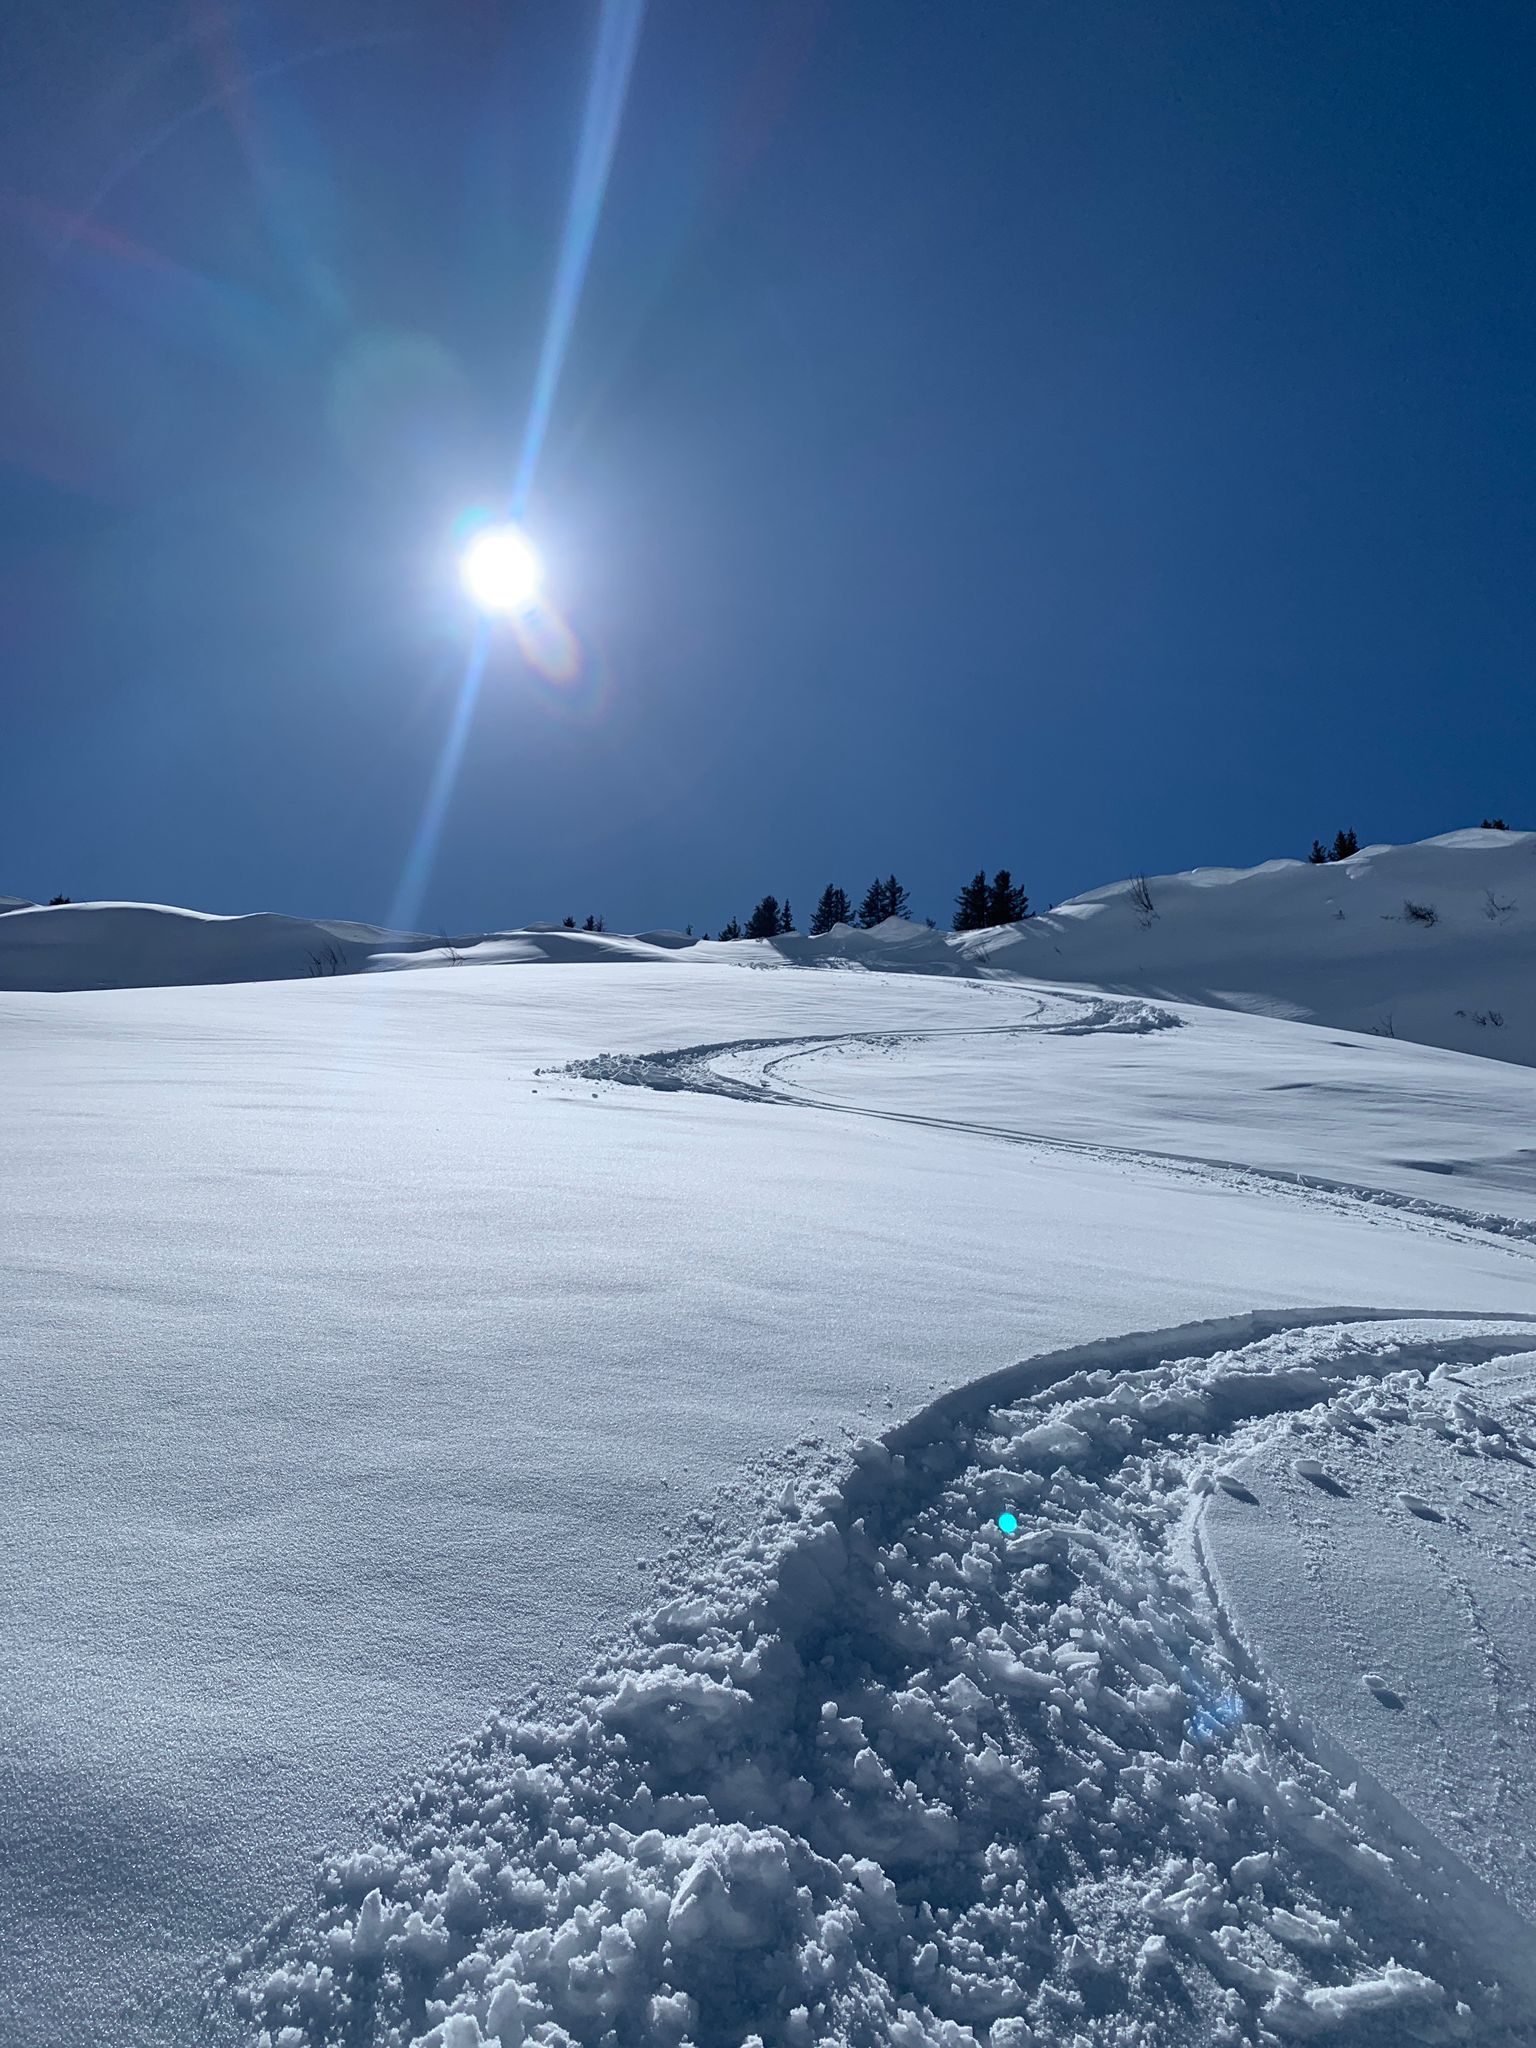 Morzine March Skiing – The best of both worlds